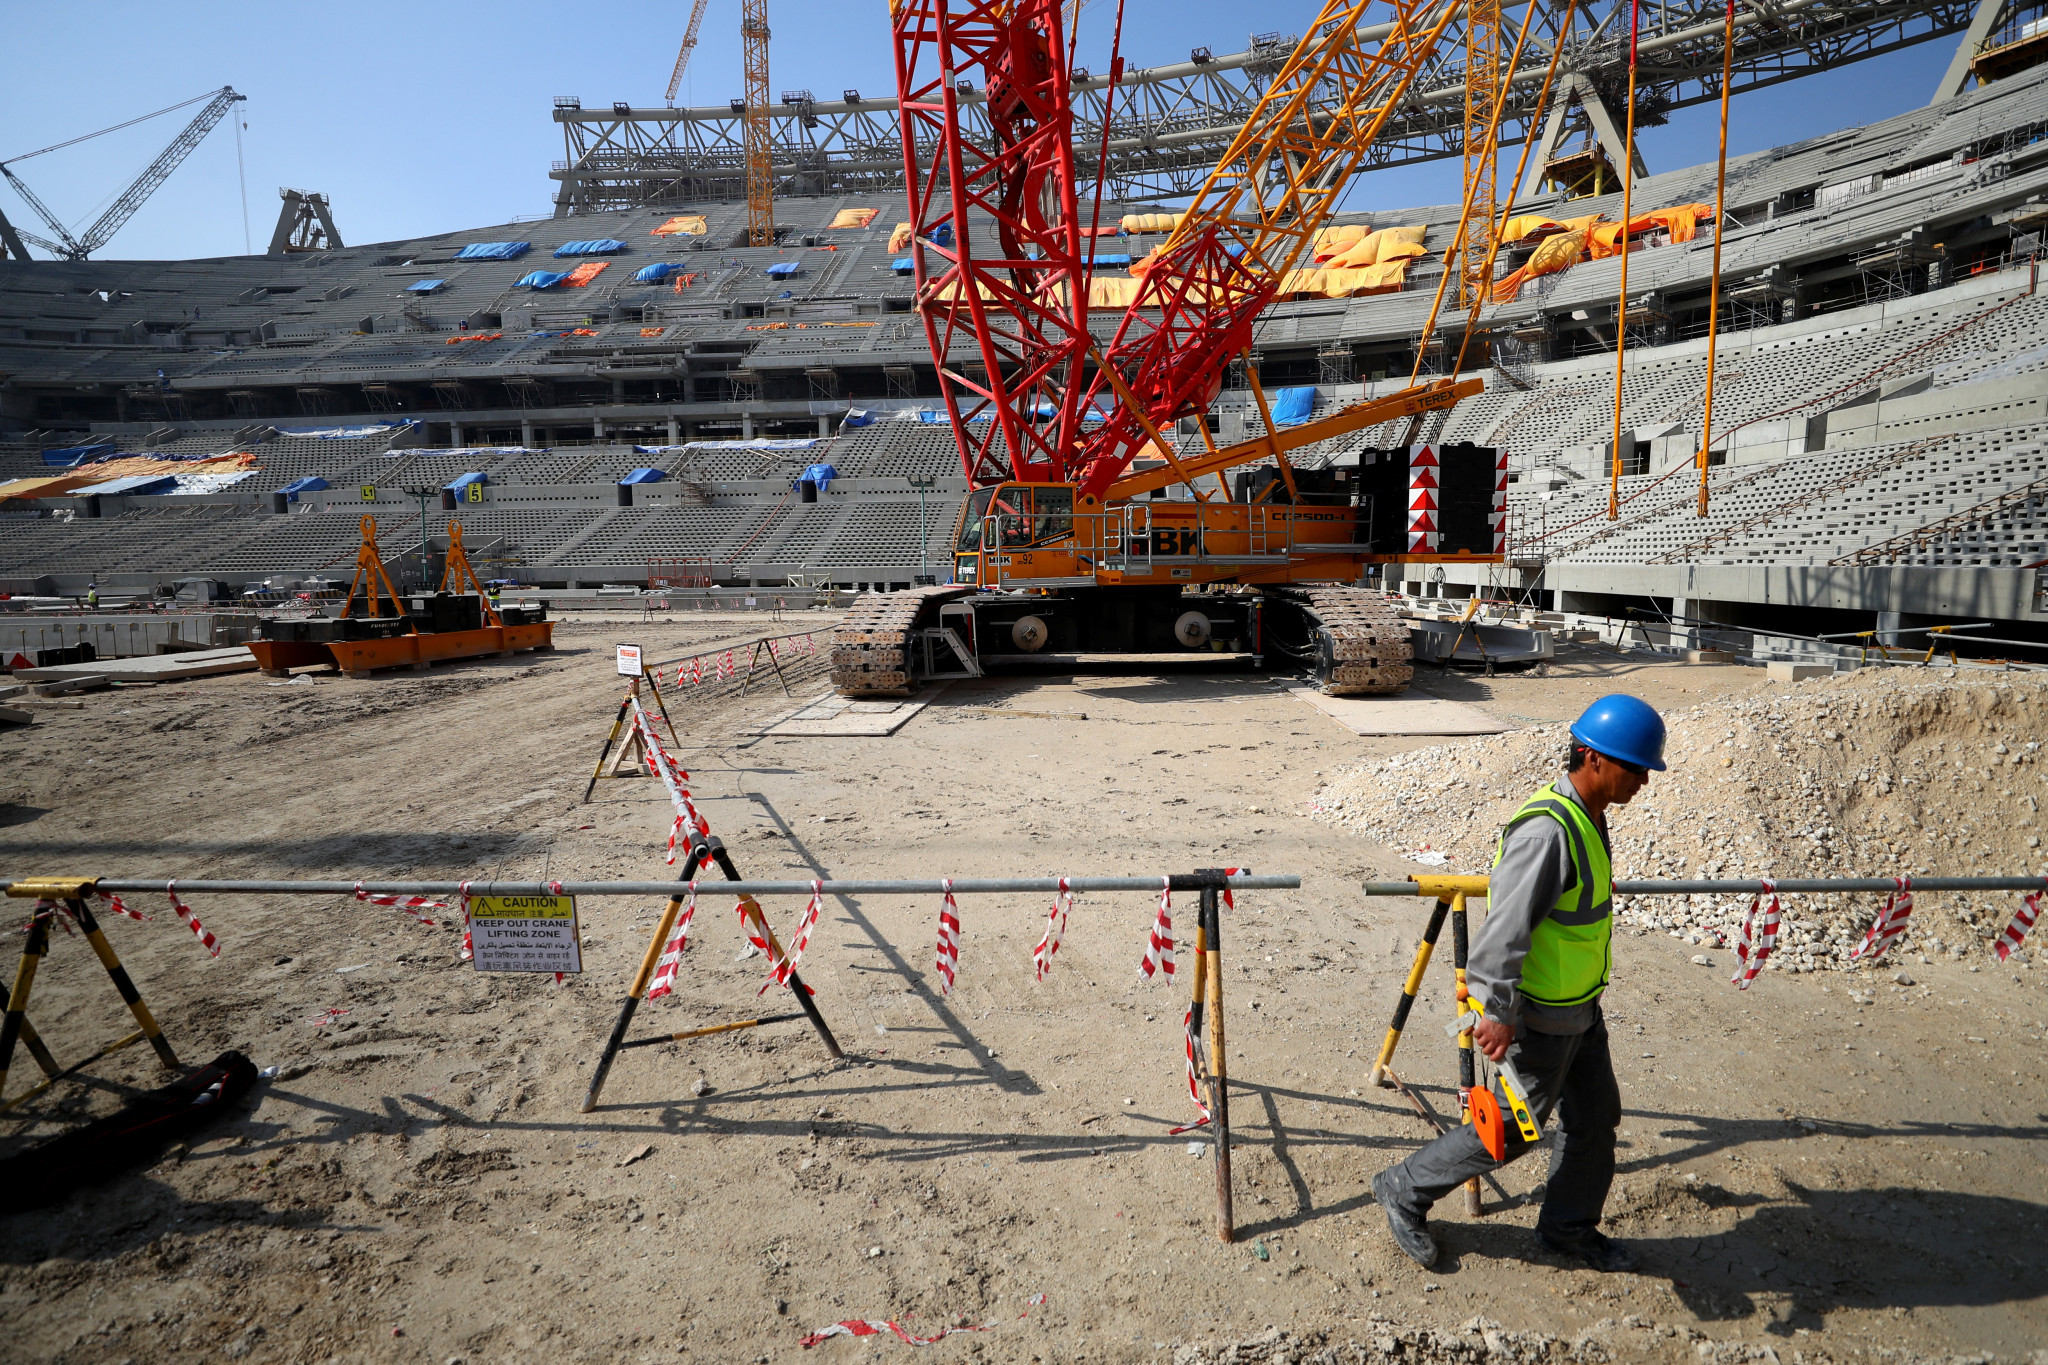 FAs accused of failure to conduct human rights due diligence for Qatar 2022 FIFA World Cup